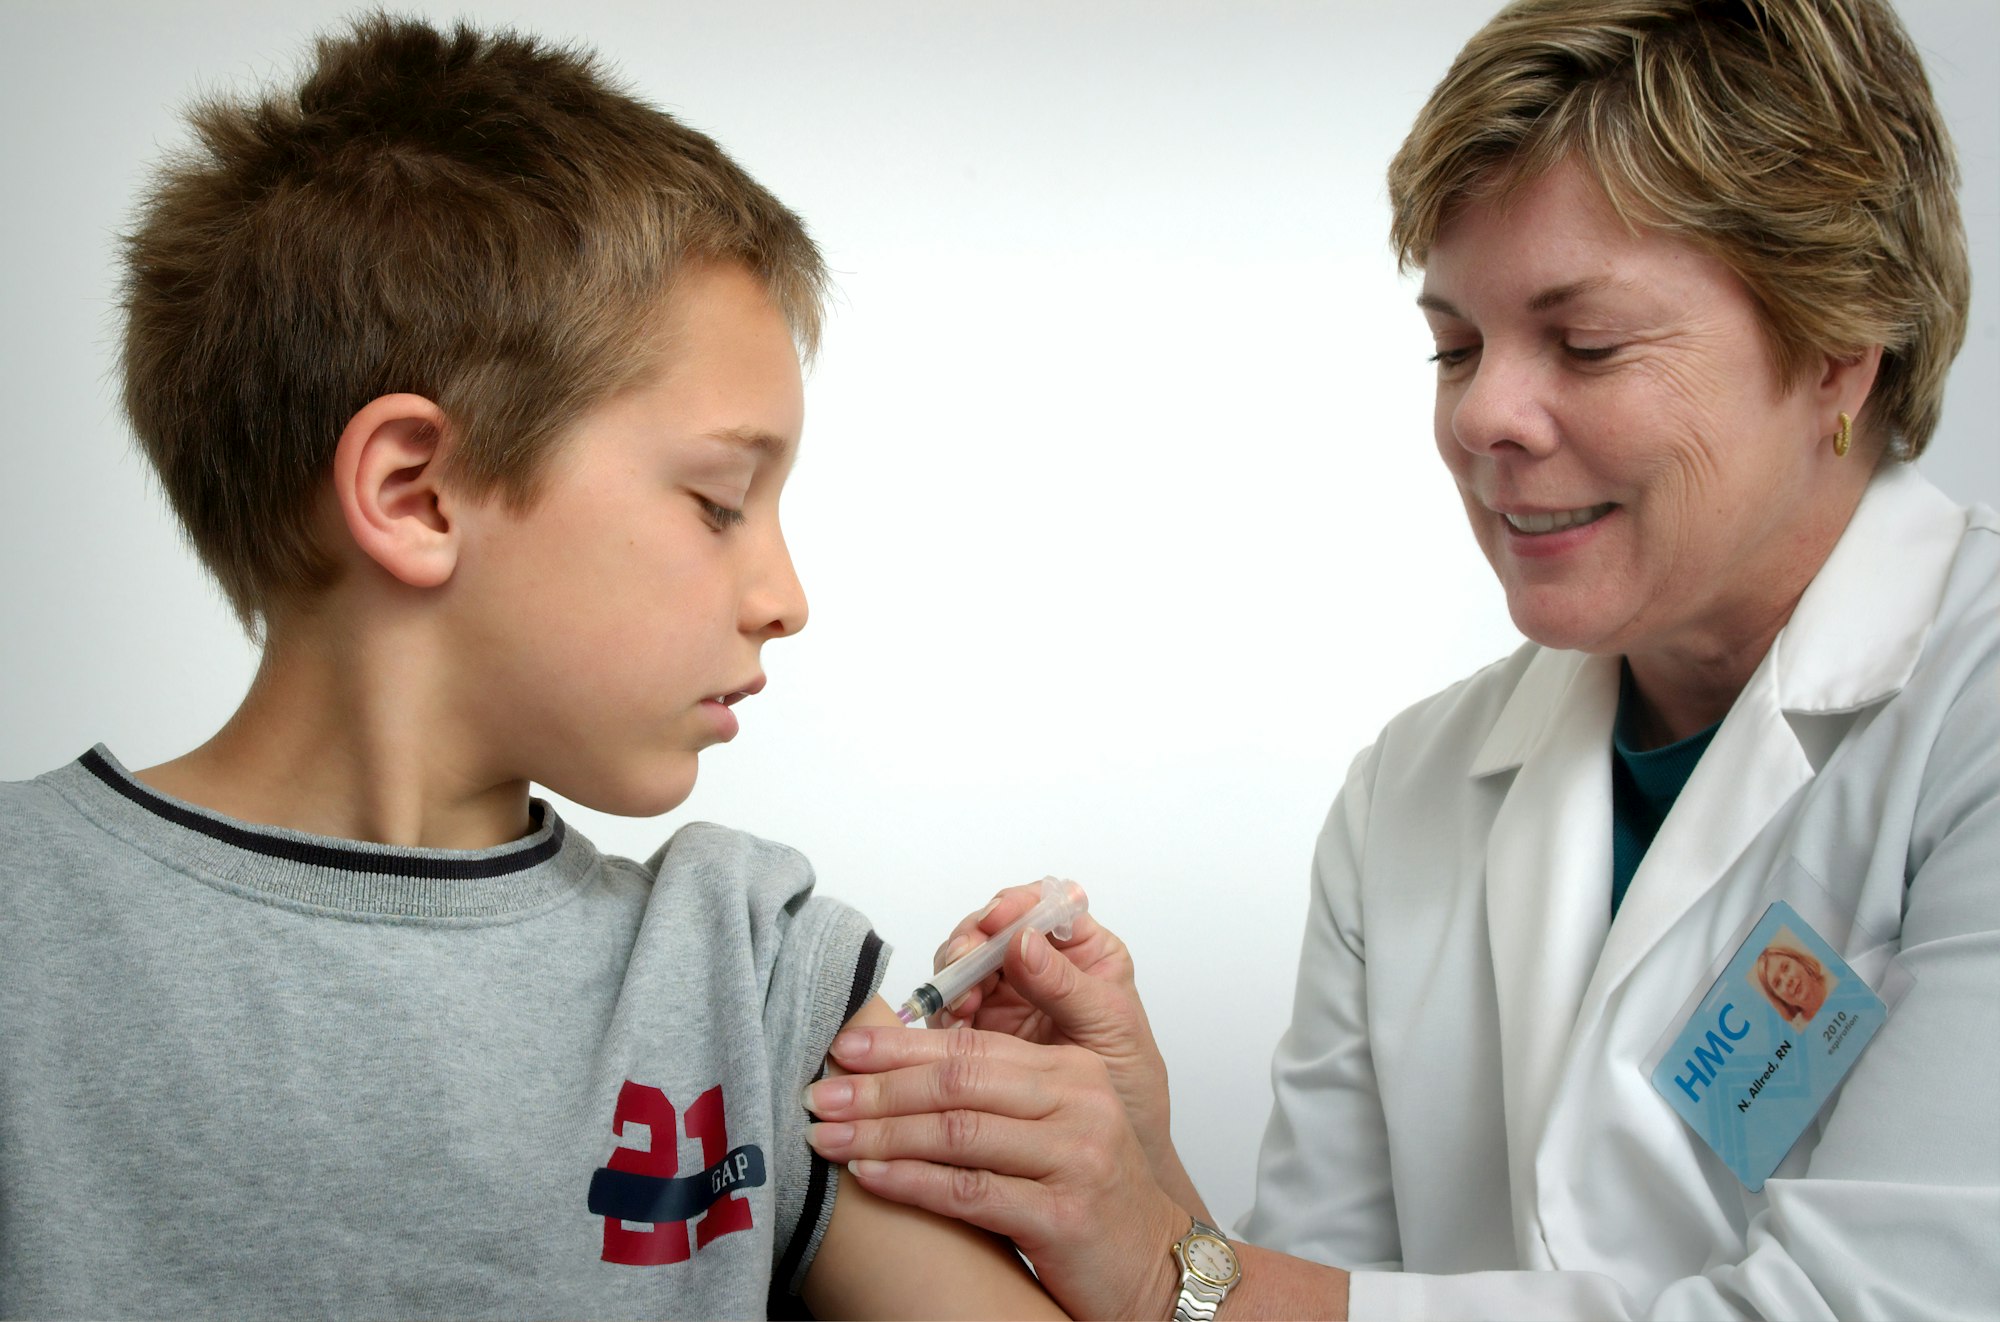 The nurse depicted in this 2006 photograph was in the process of administering an intramuscular vaccination in the left shoulder of a young boy. The nurse was pinching the overlying shoulder skin, in order to immobilize the injection site.